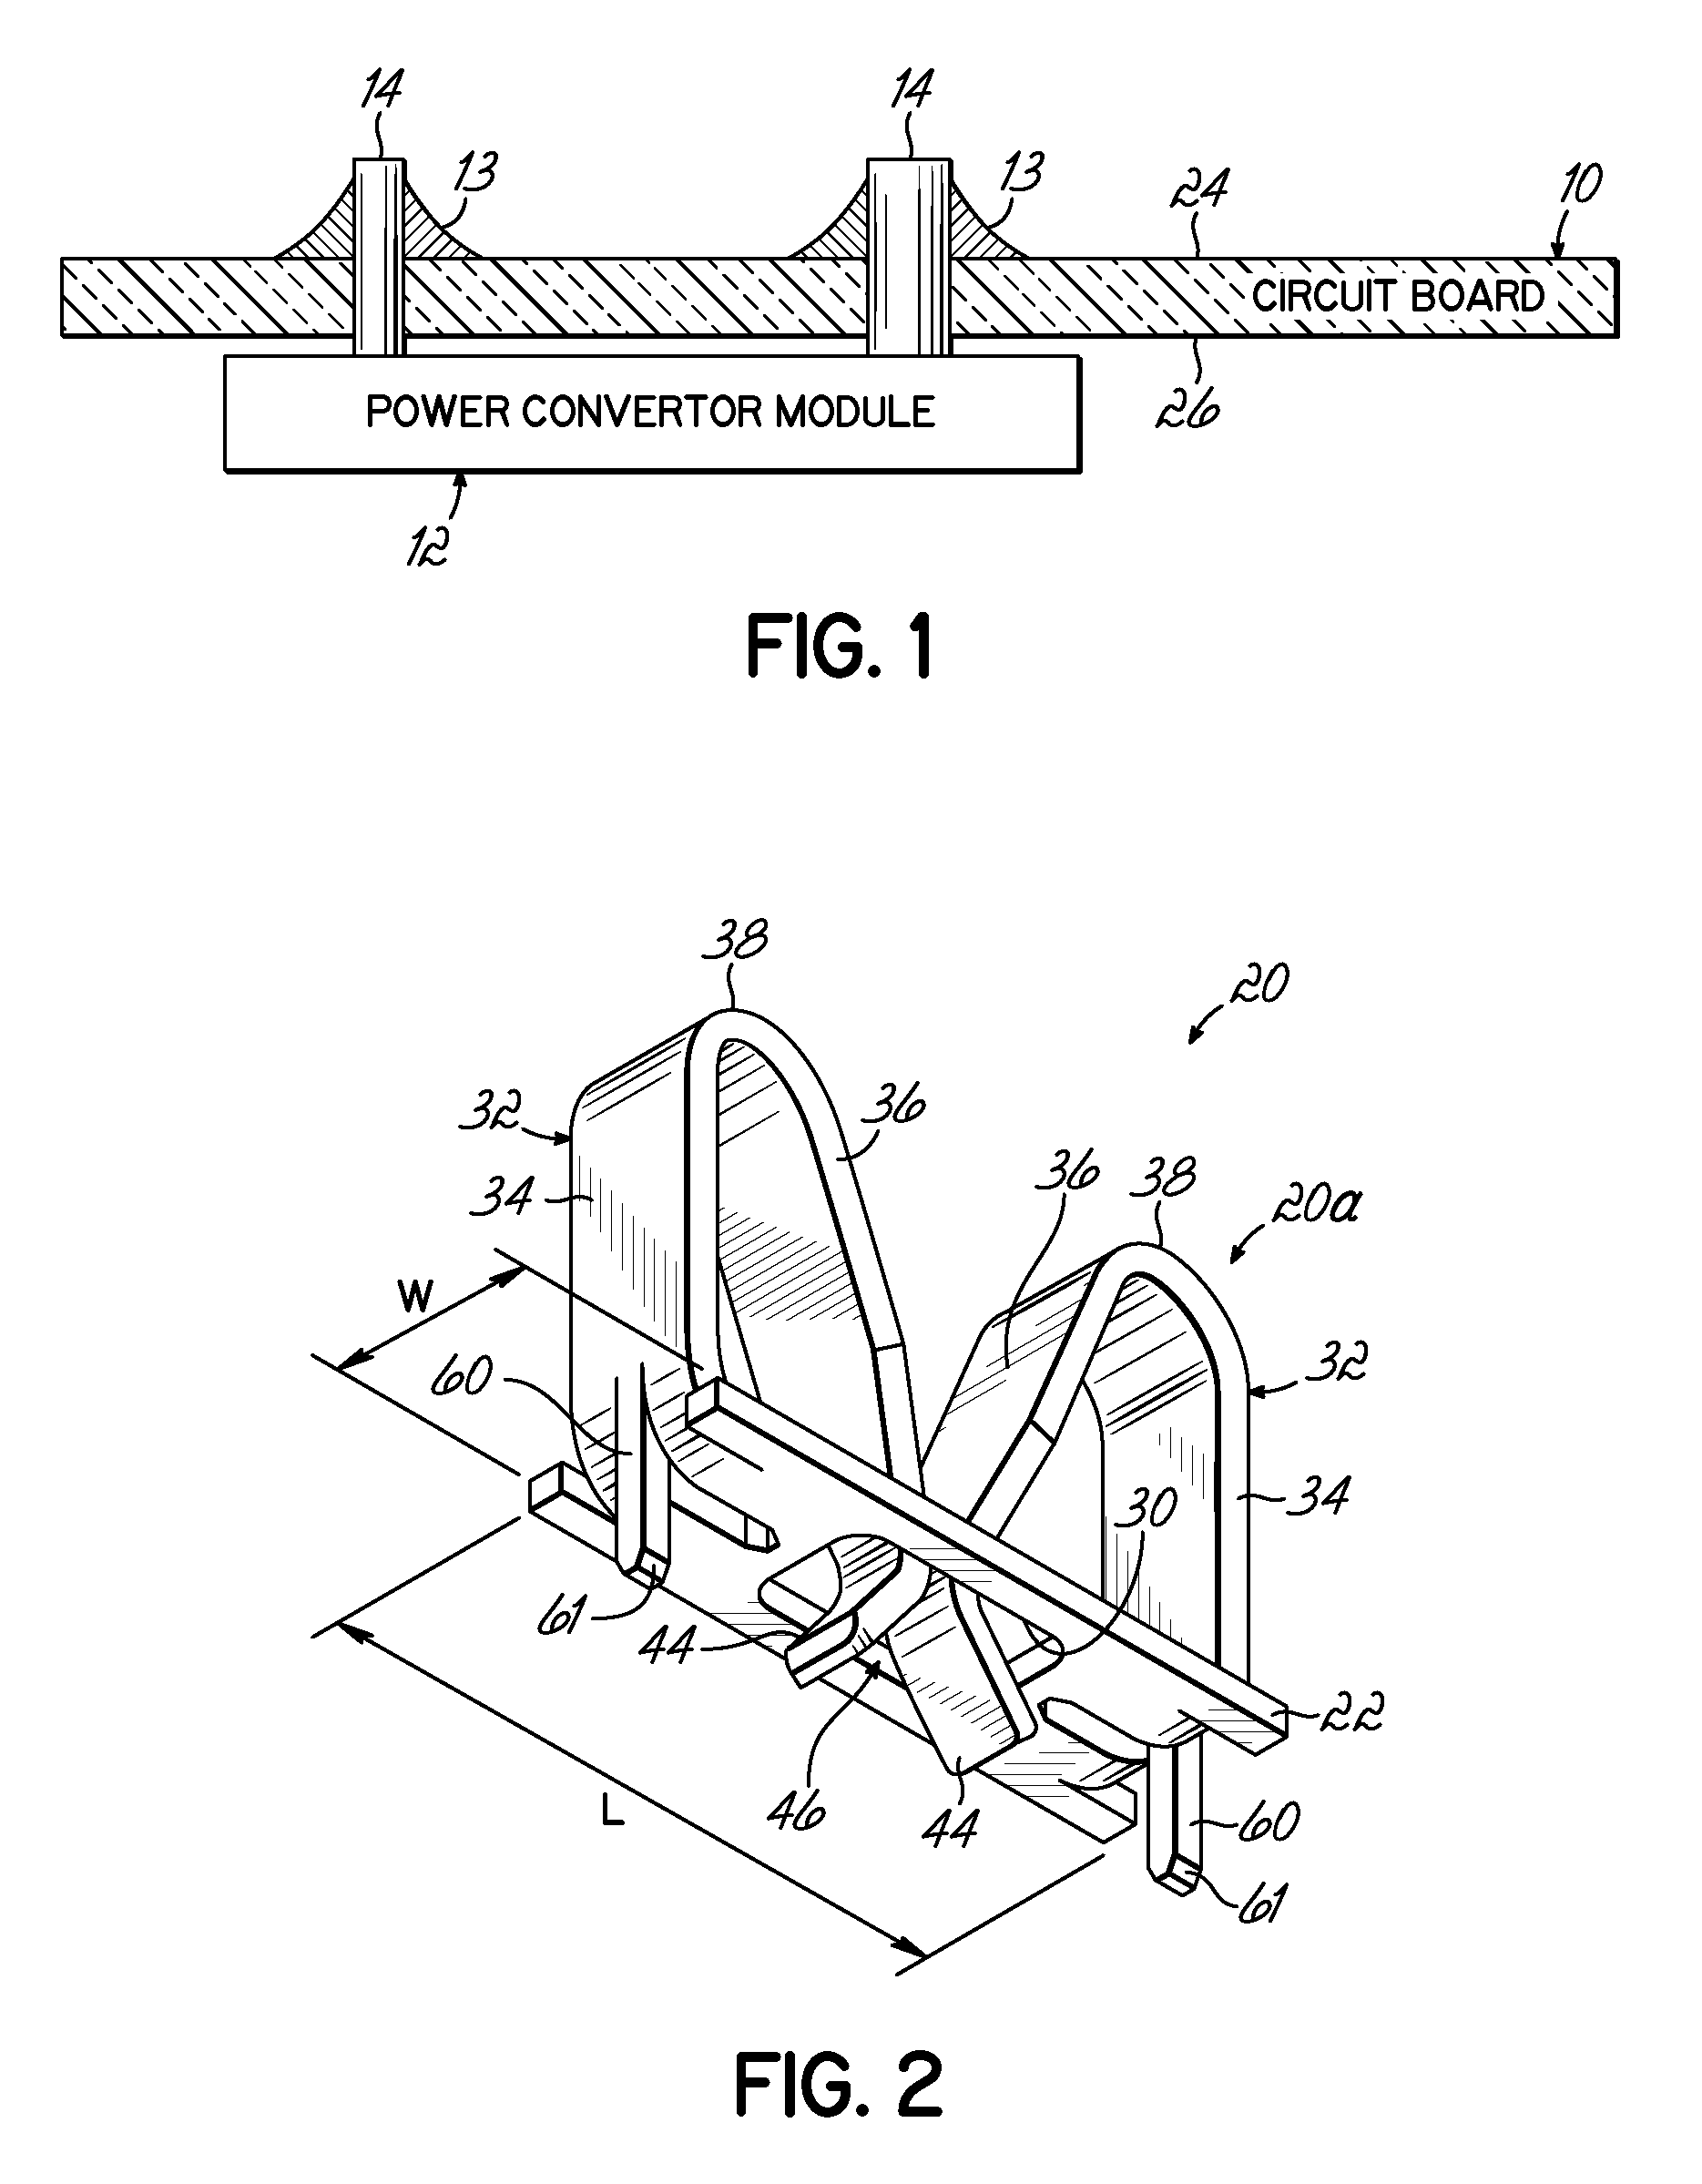 Bottom entry interconnection element for connecting components to a circuit board